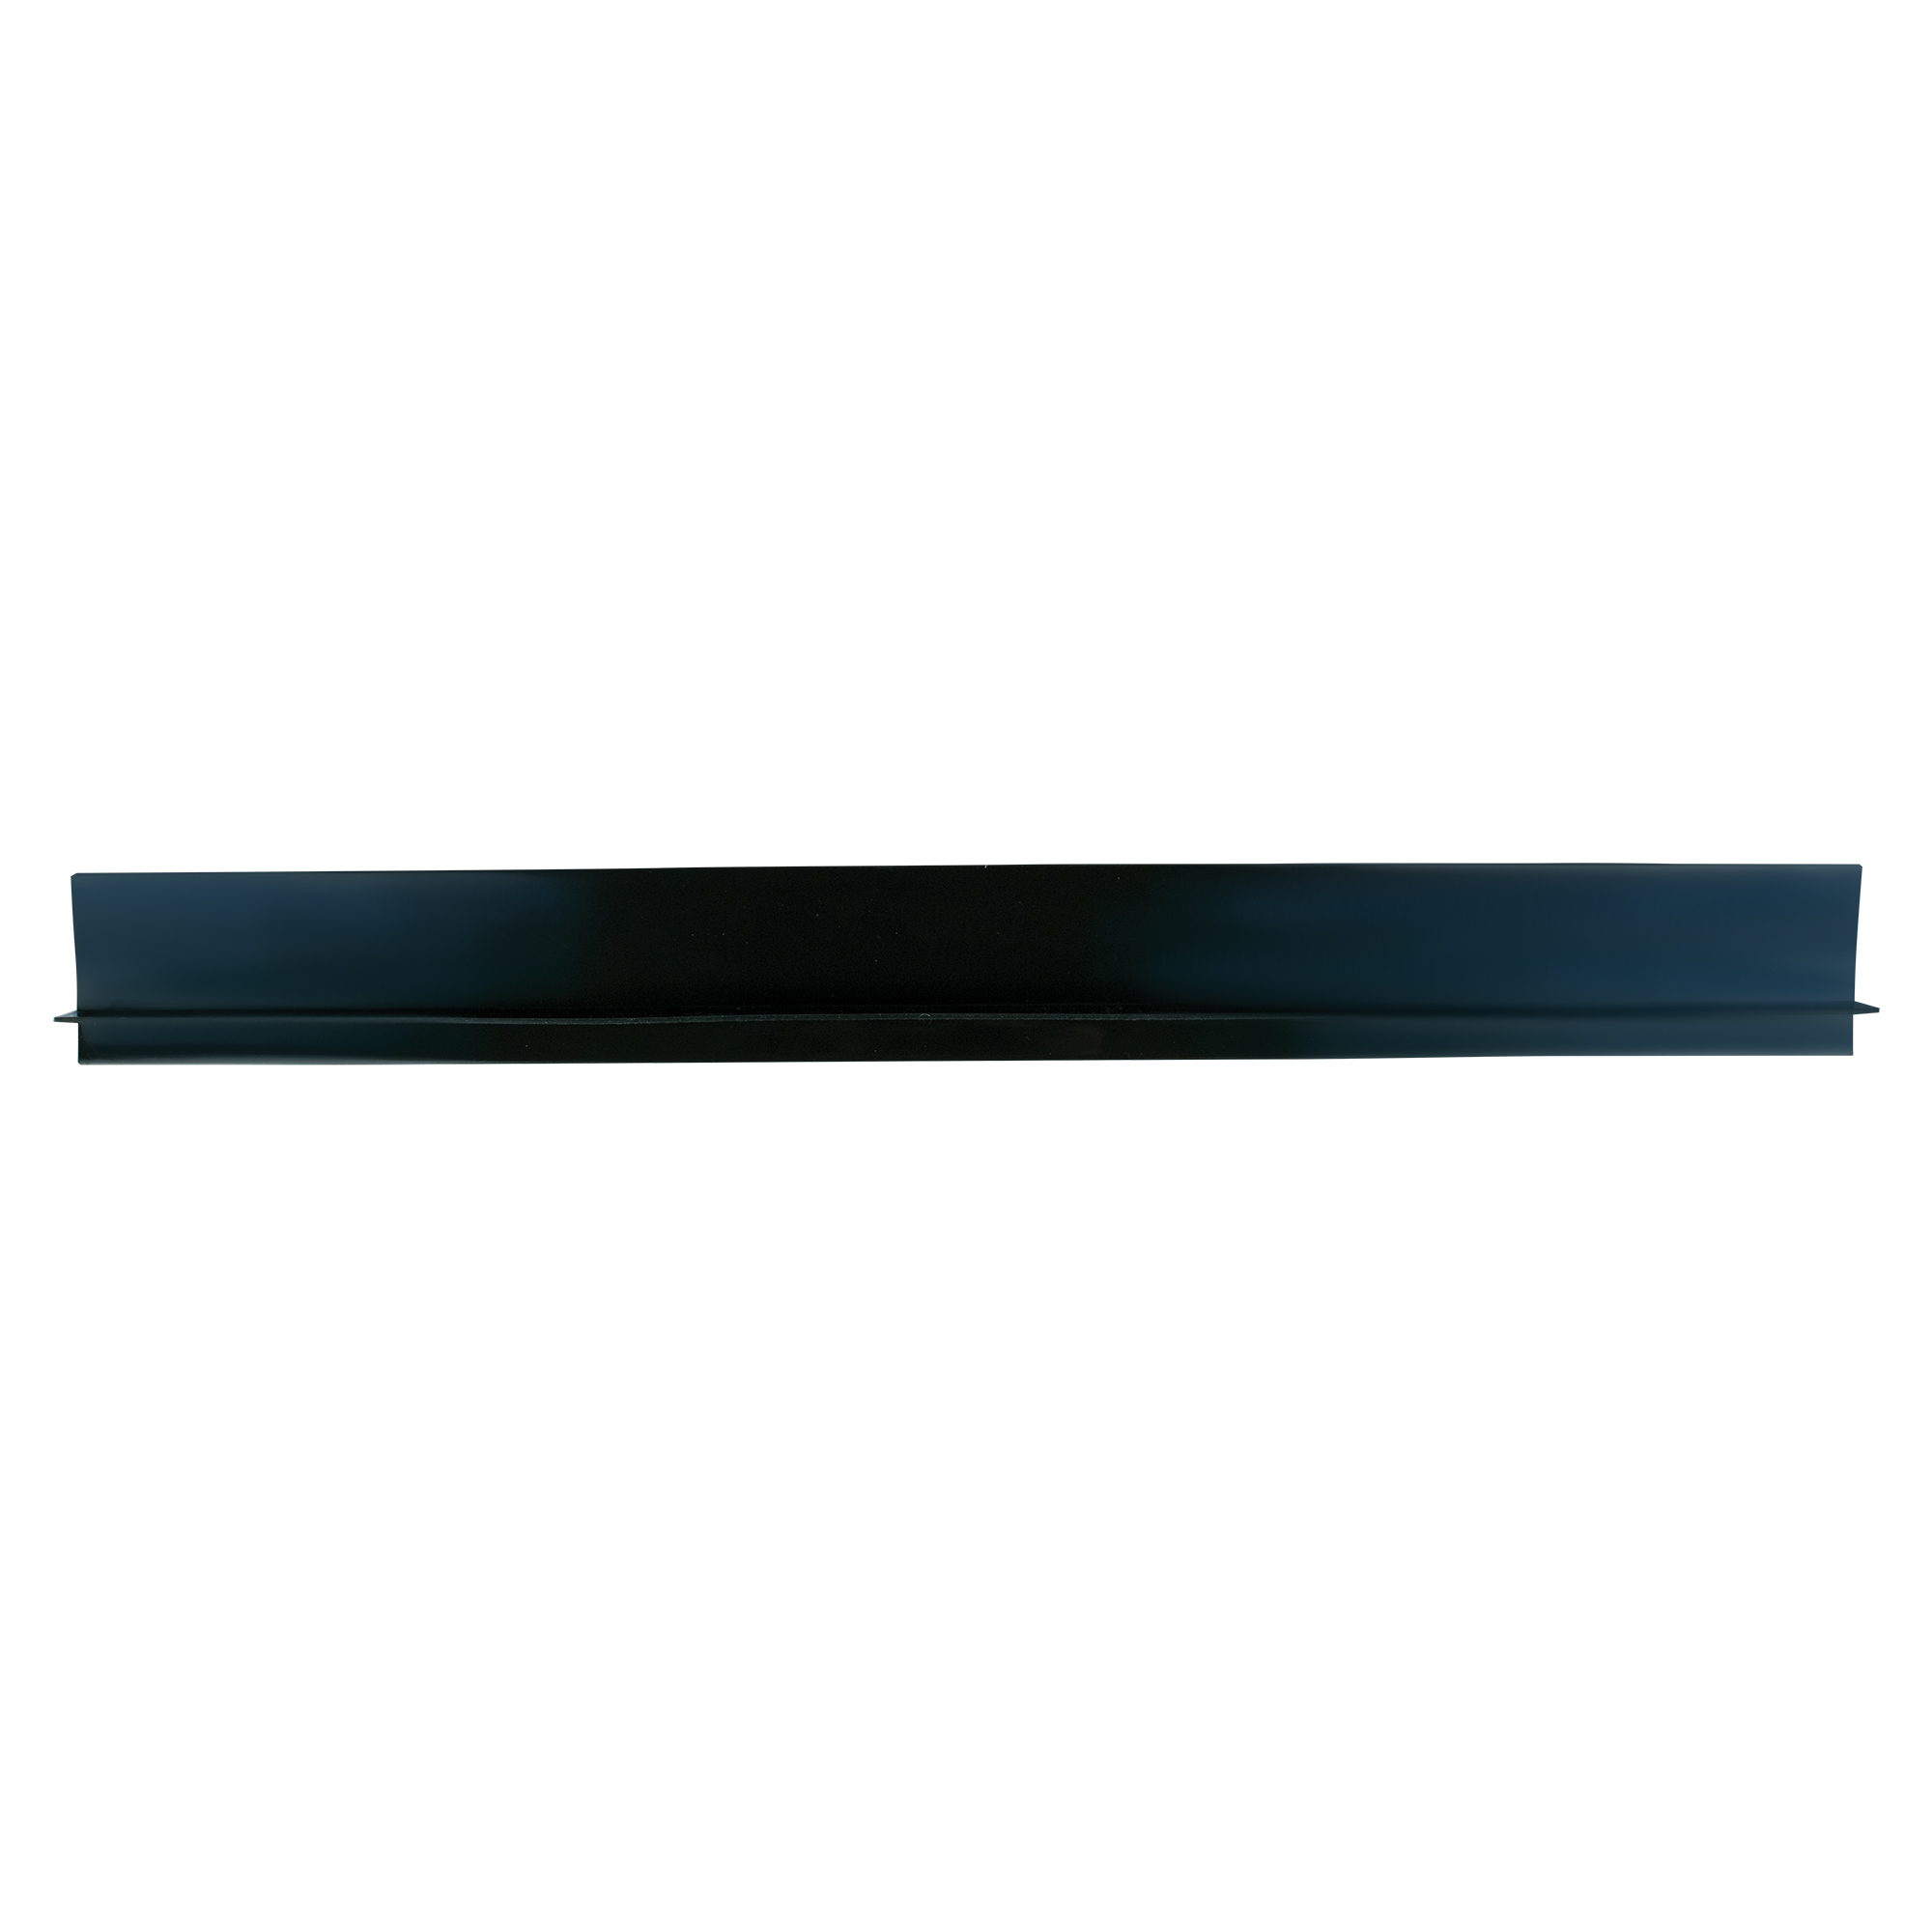 Range Kleen 1 Piece Black Silicone Kleen Seam, 20.5 inches long - image 2 of 5